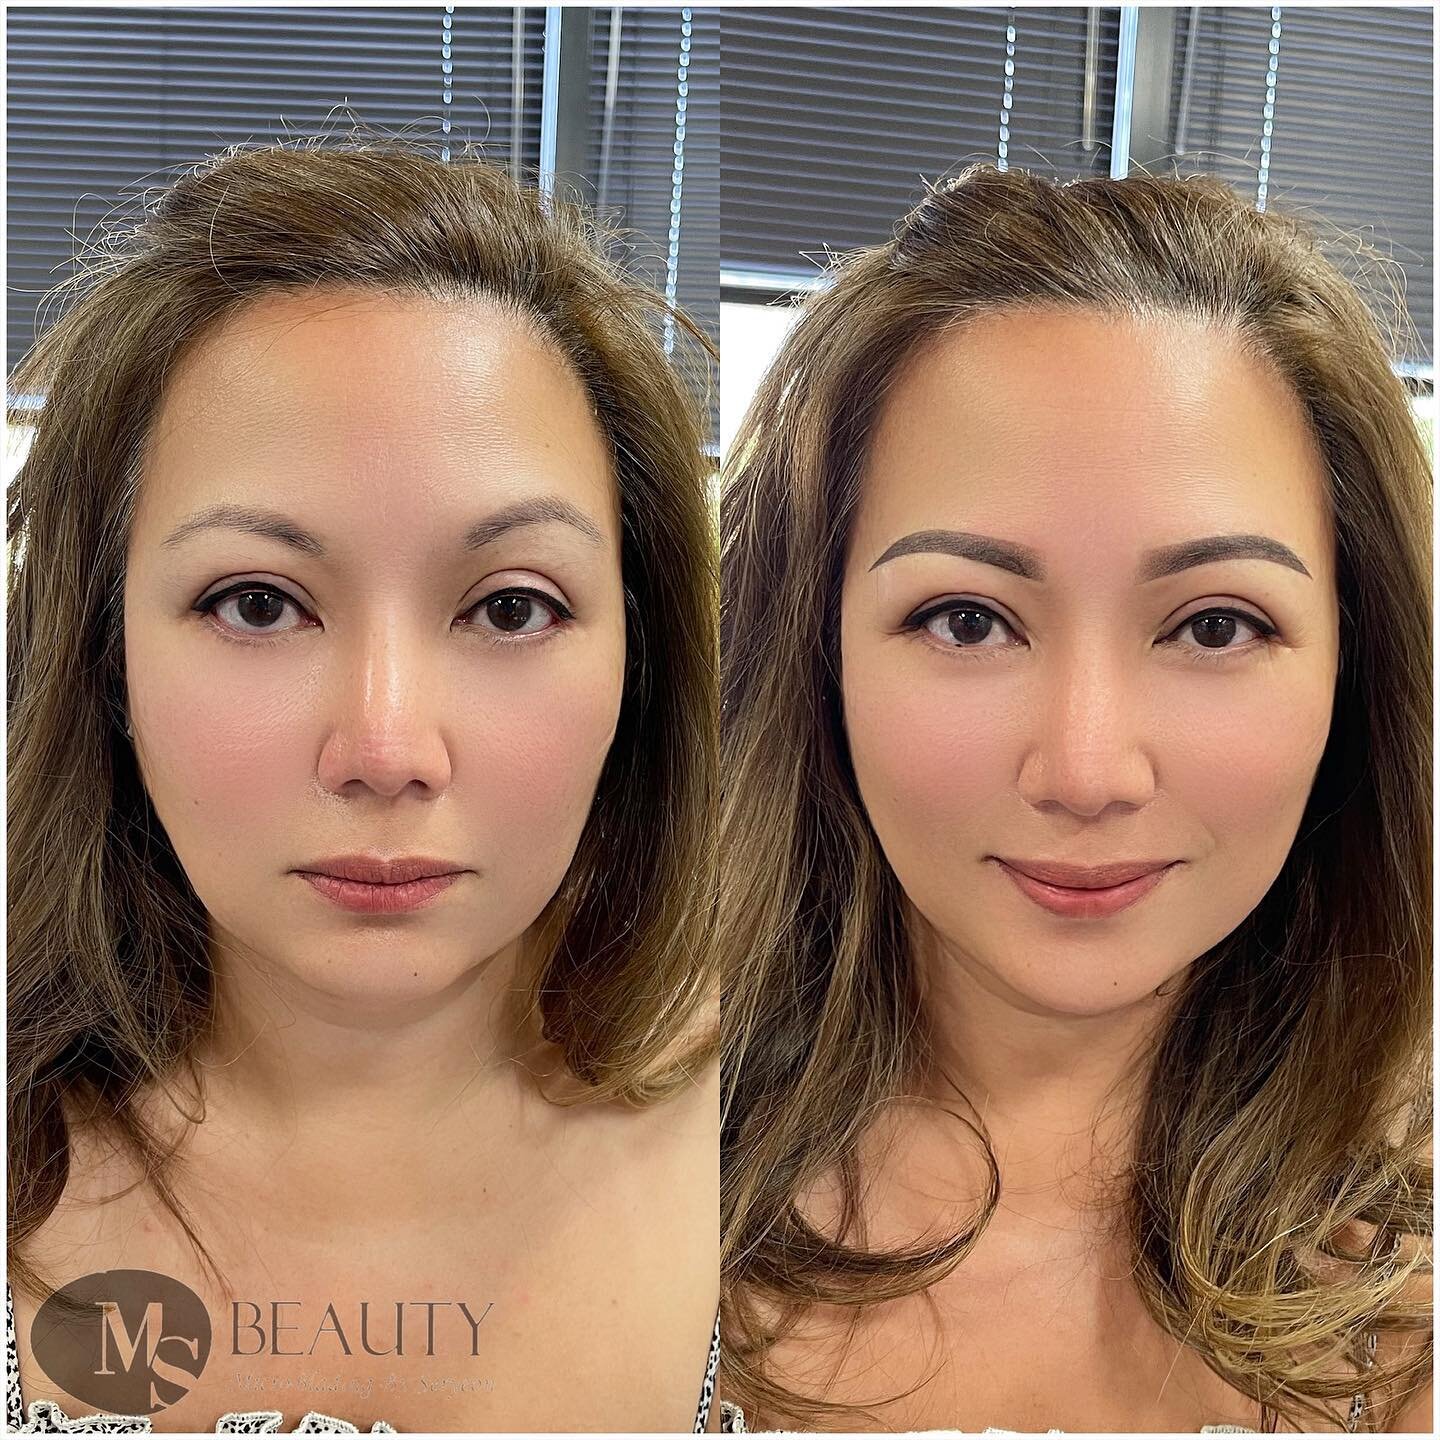 .
Ombr&eacute; shading 
Immediately after 
.

𝐌𝐬&nbsp;𝐛𝐞𝐚𝐮𝐭𝐲
⠀
▪️Introduced and published in reliable and recognized media oulets in Korea (VJ특공대,&nbsp;무한지대&nbsp;큐등&nbsp;다수의&nbsp;언론.잡지에&nbsp;소개됨) 
▪️Acquired Cosmet